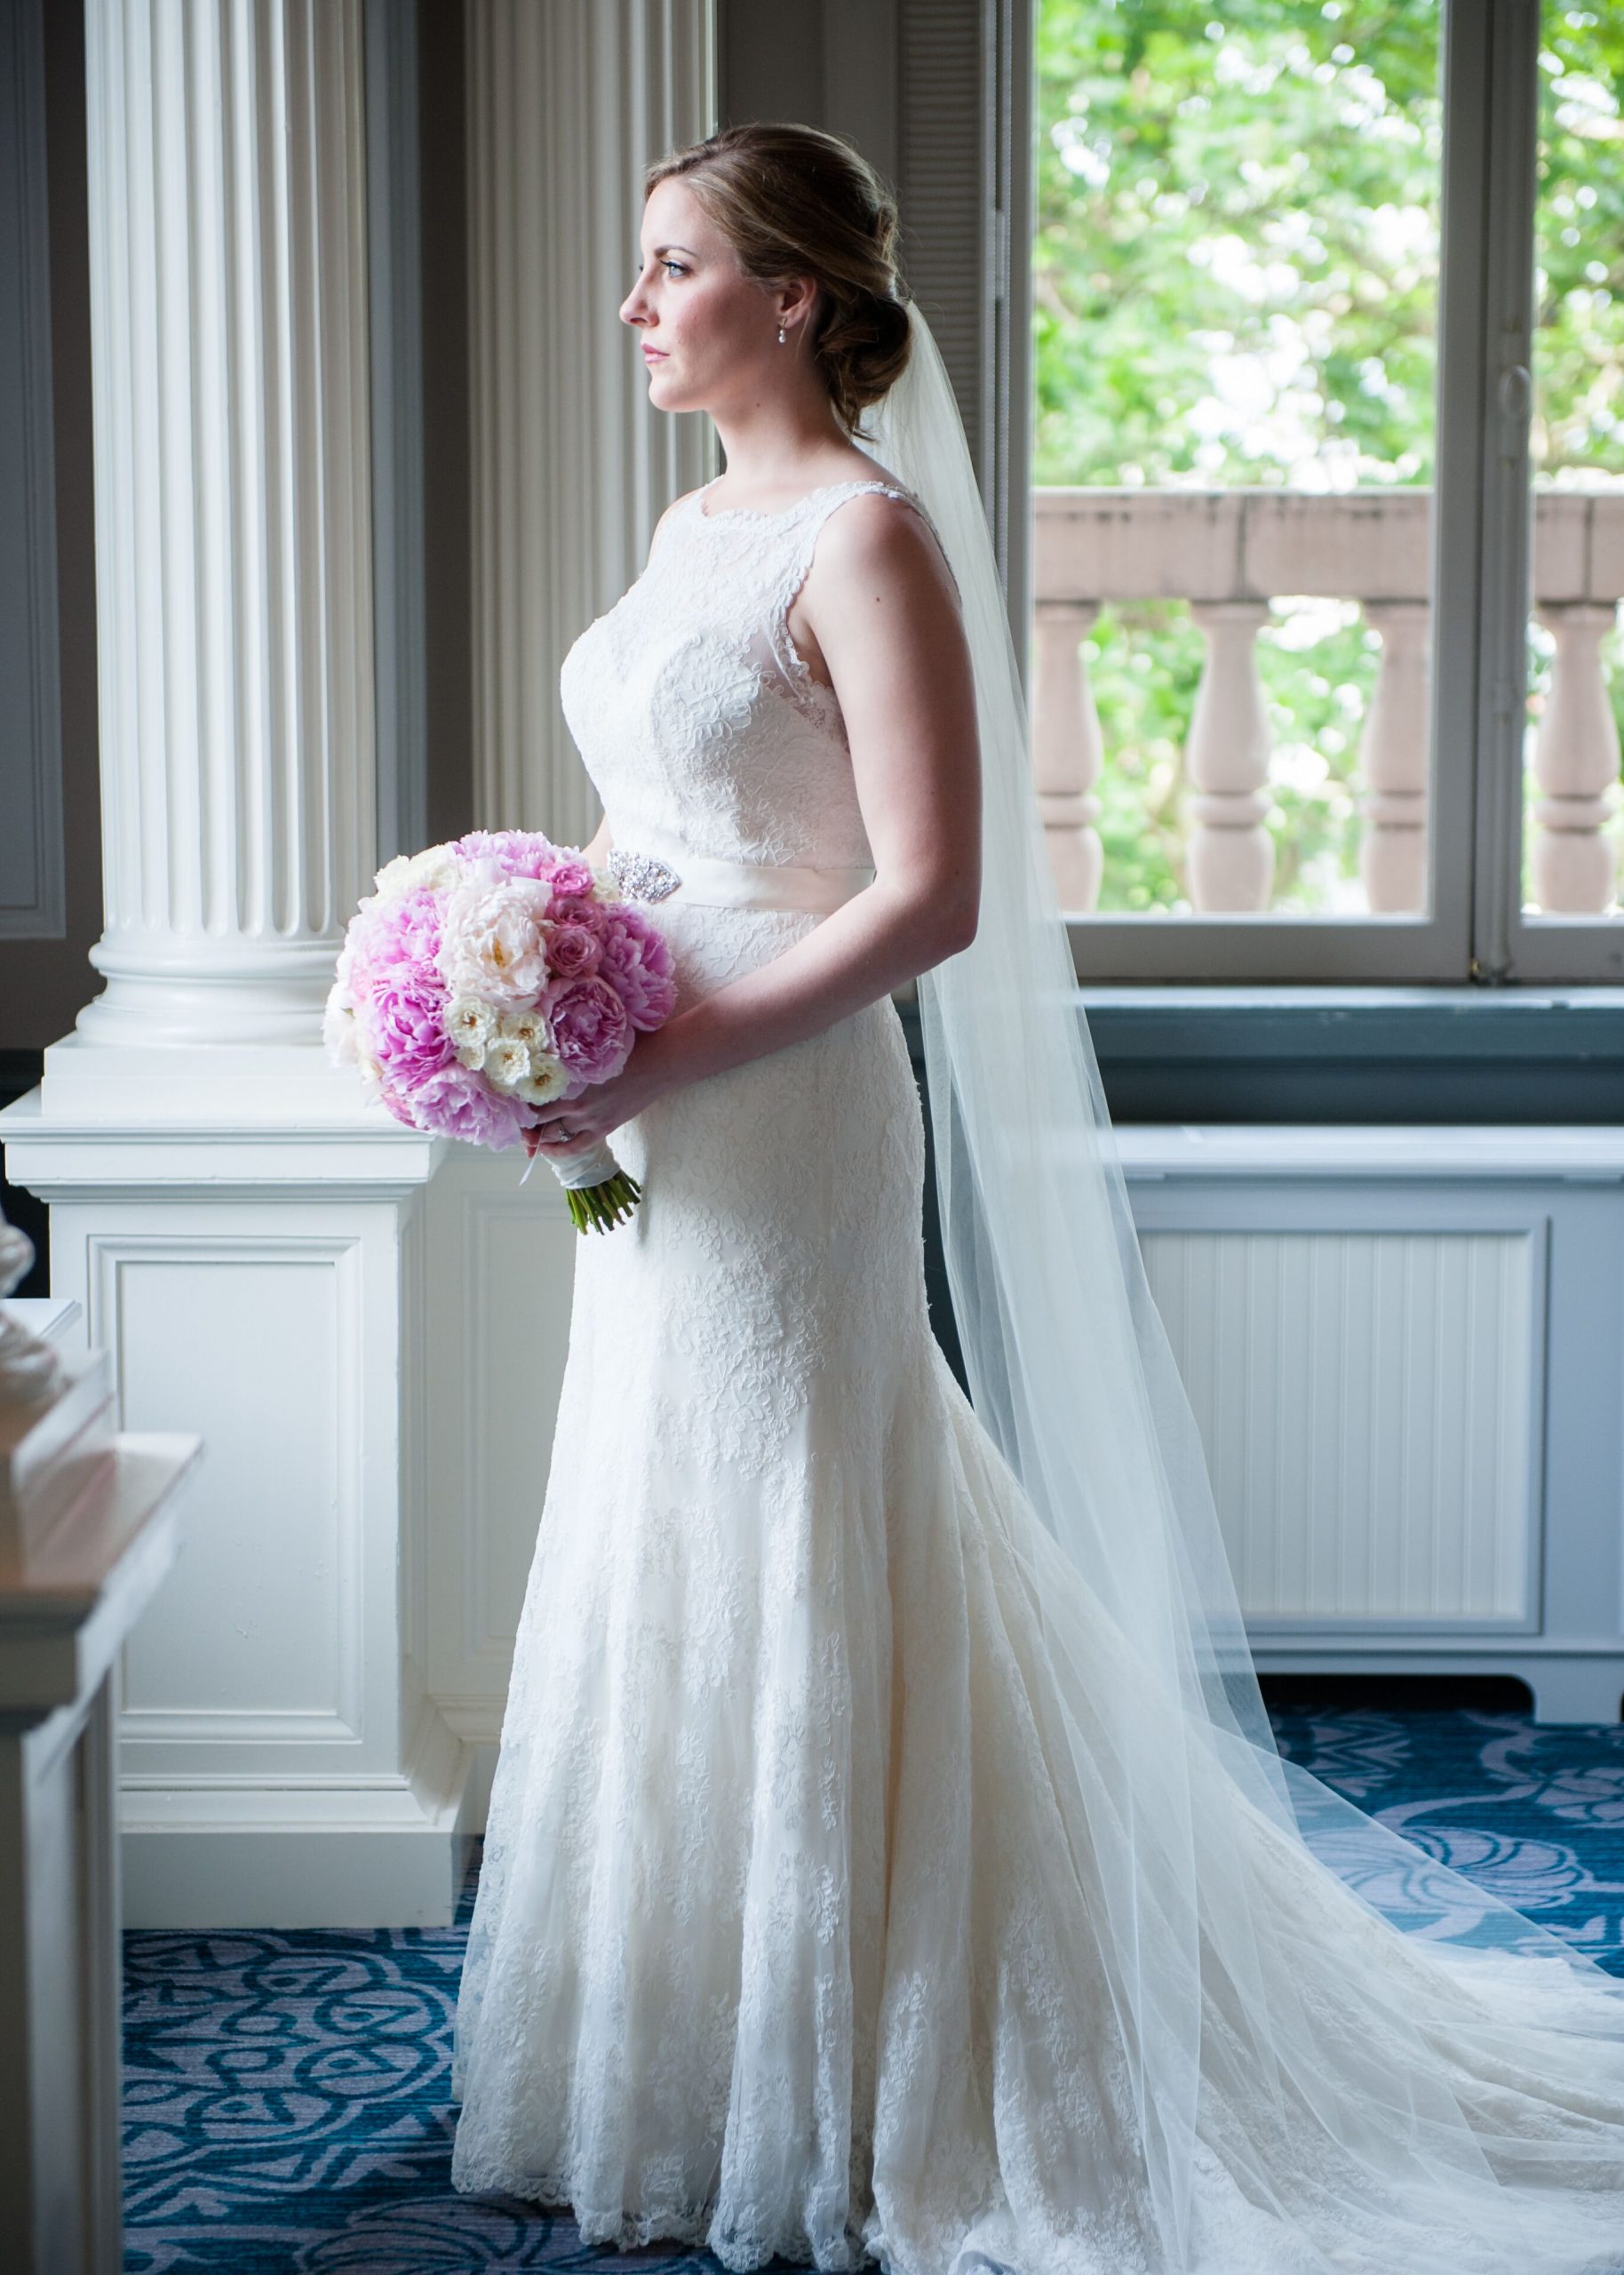 Elegant Lace Wedding Dress with Cathedral Veil